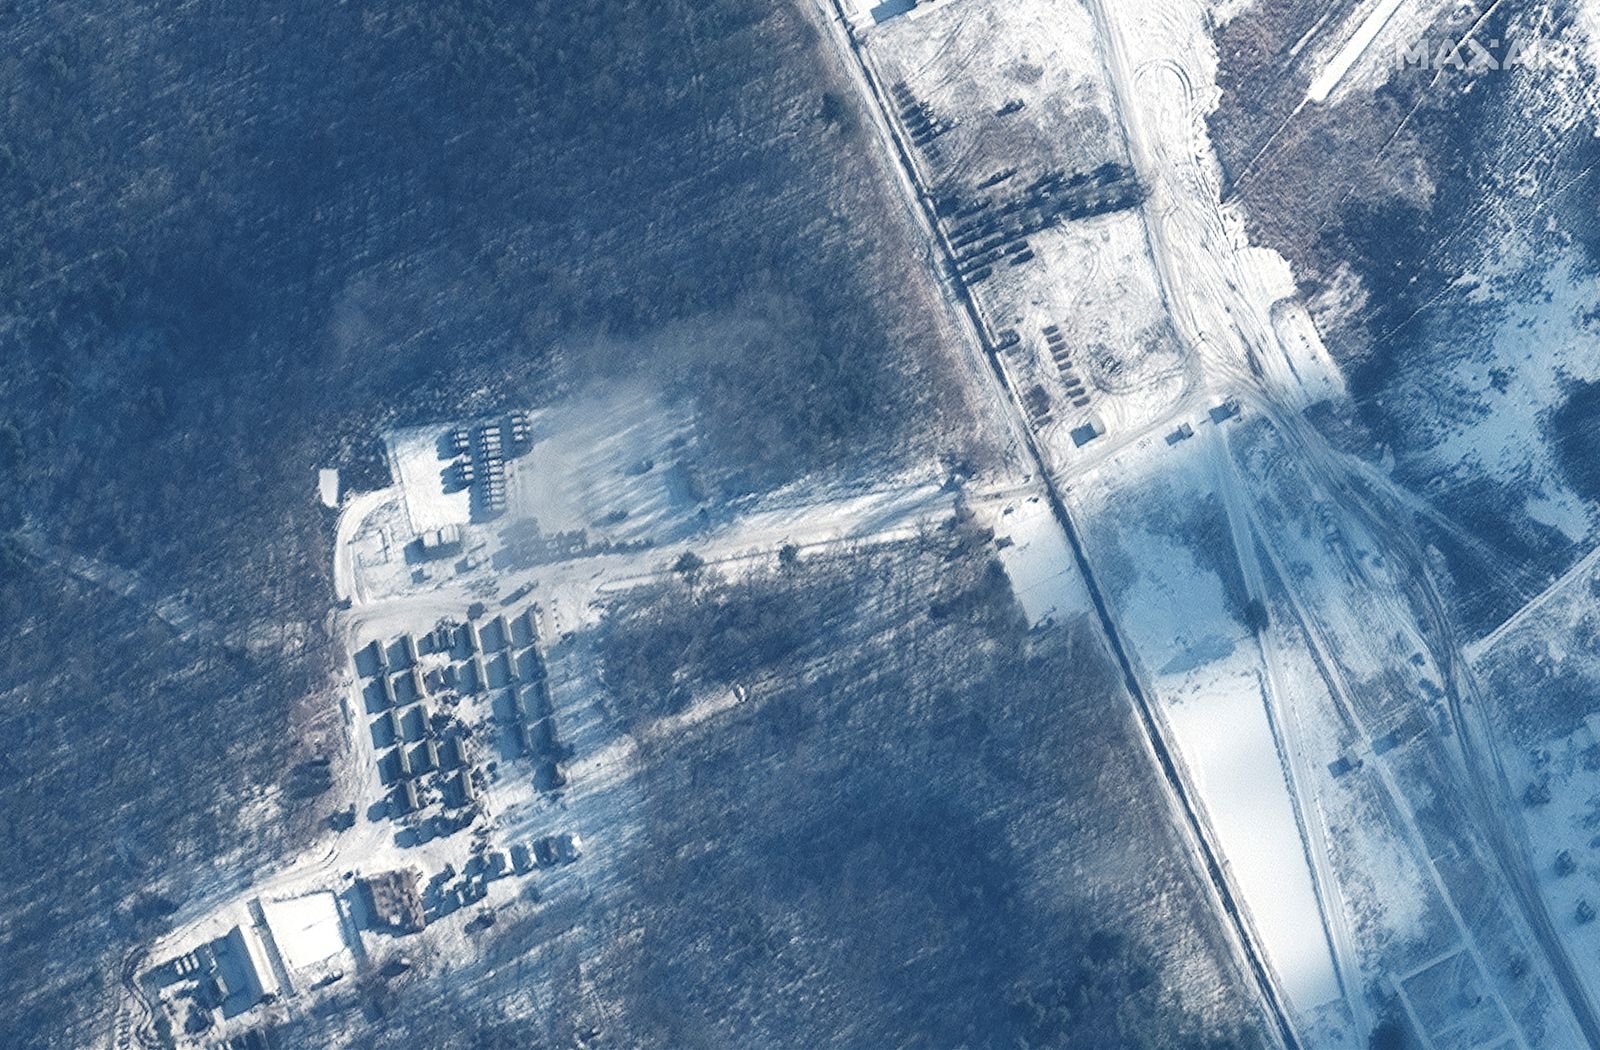 An overview of troop tents at the Brestsky training ground, Belarus is seen in this Maxar satellite image taken on January 22, 2022 - via REUTERS